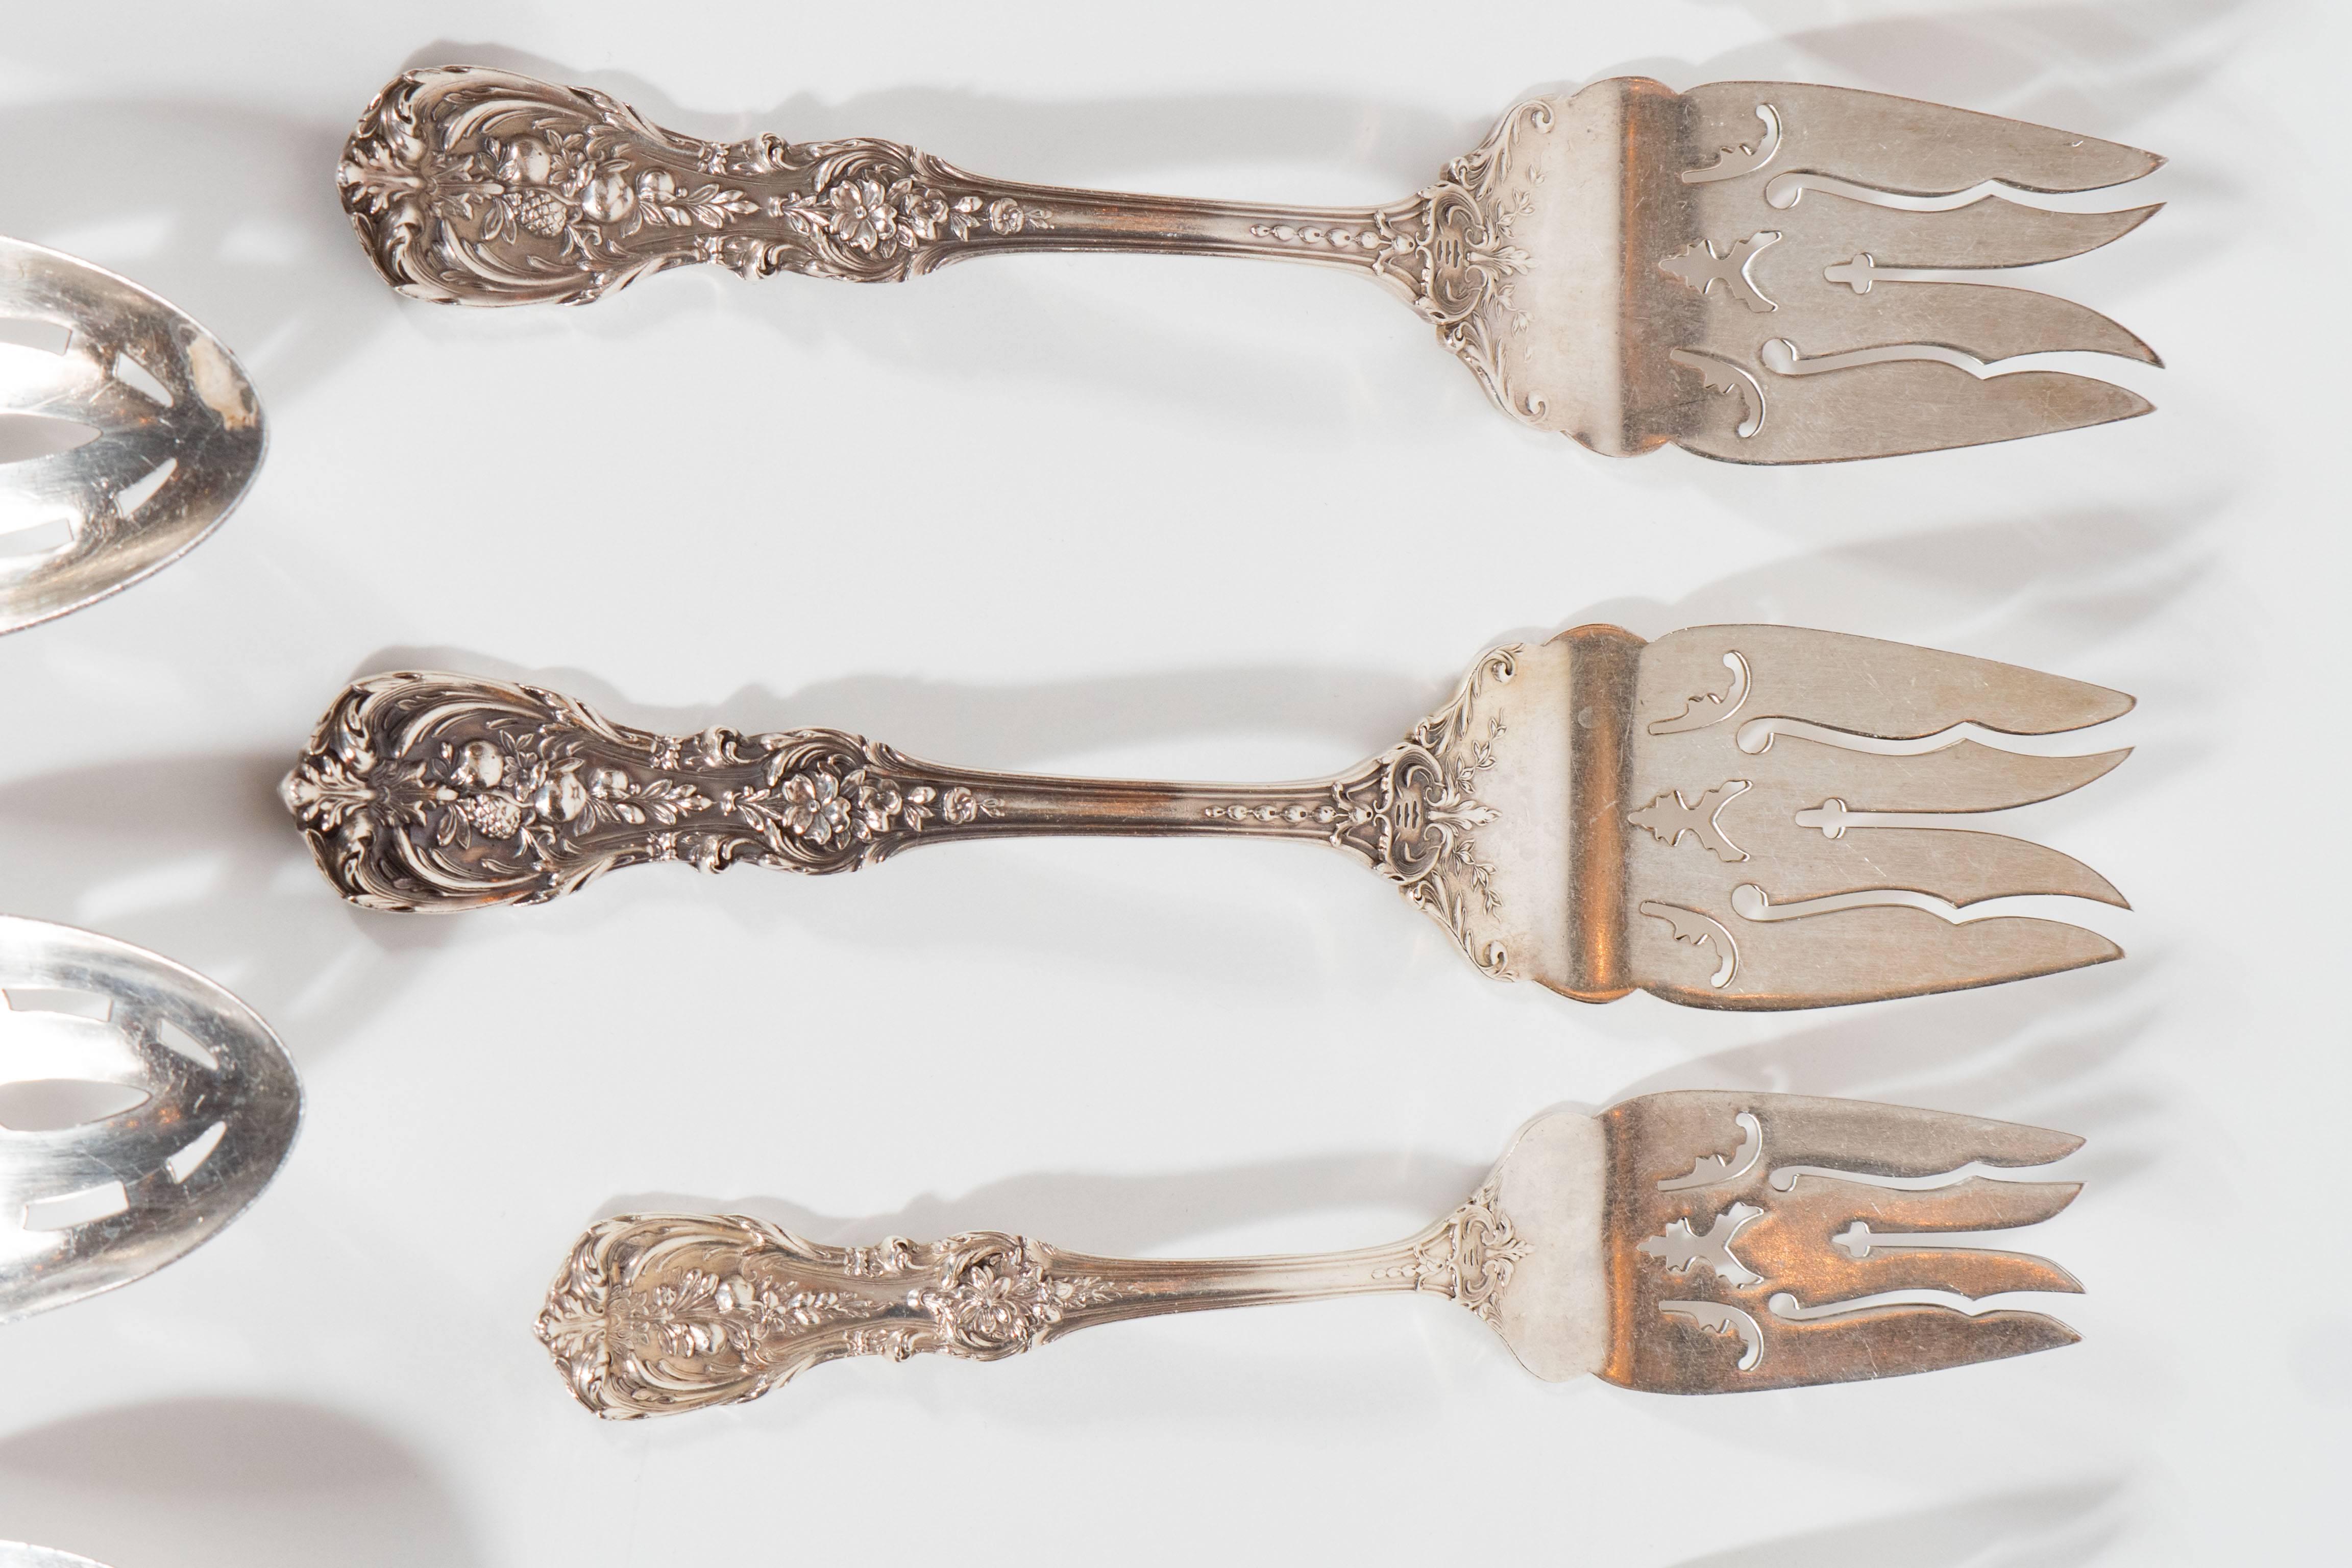 This magnificent often called America's most glorious sterling silver flatware pattern, Francis I is a true work of art. Each piece's central decoration represents a different cluster of fruit and flowers, giving your table a unique and Classic